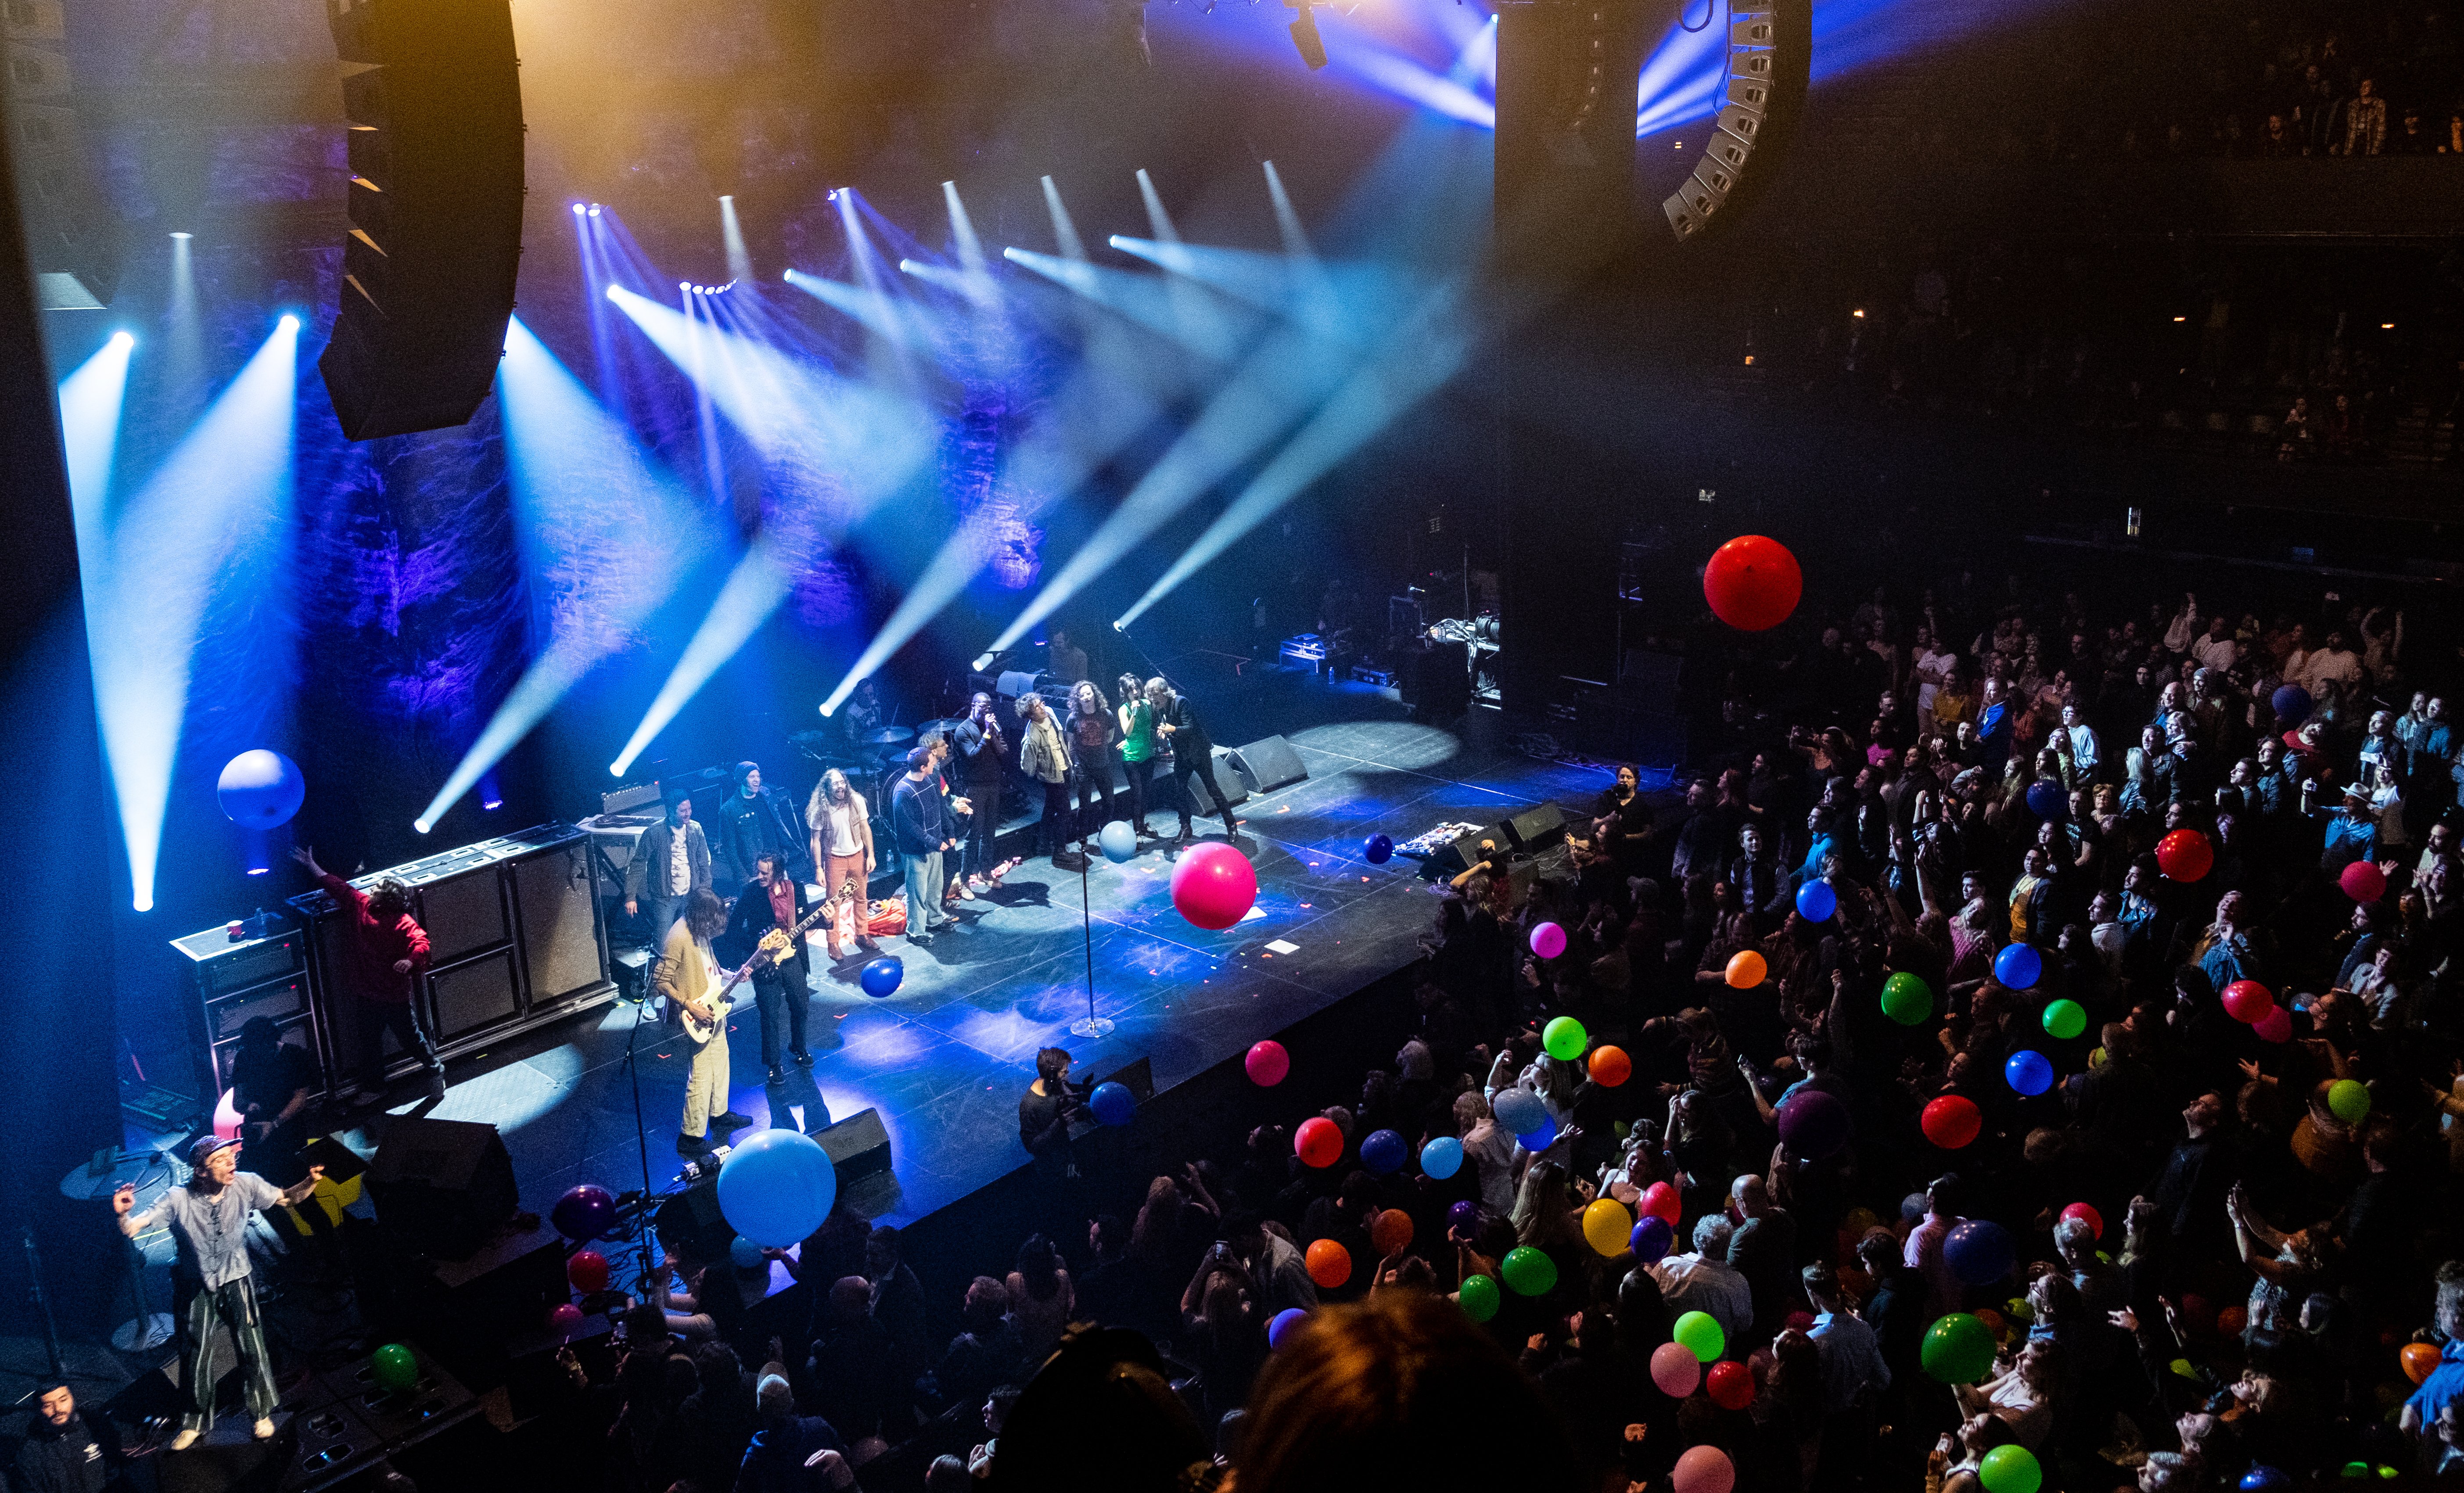 People on stage are singing and dancing. The crowd is playing with a dozen balloons, which are all different colors and sizes.